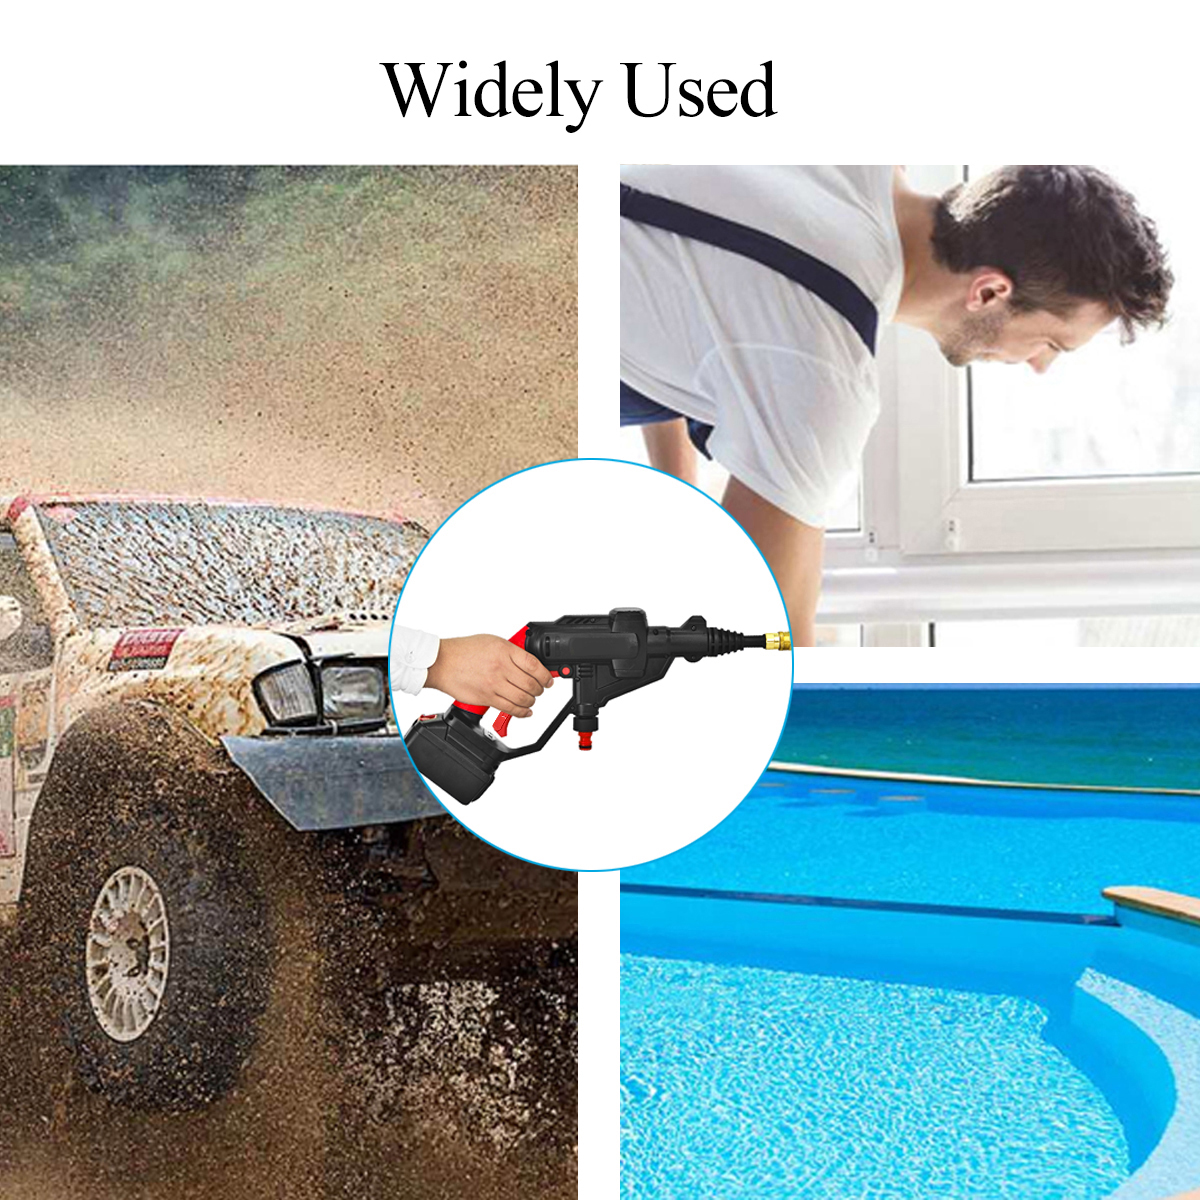 21V-20Ah-Multifunctional-Cordless-Pressure-Cleaner-Washer-Sprayer-Water-Hose-Nozzle-Pump-with-Batter-1292573-2